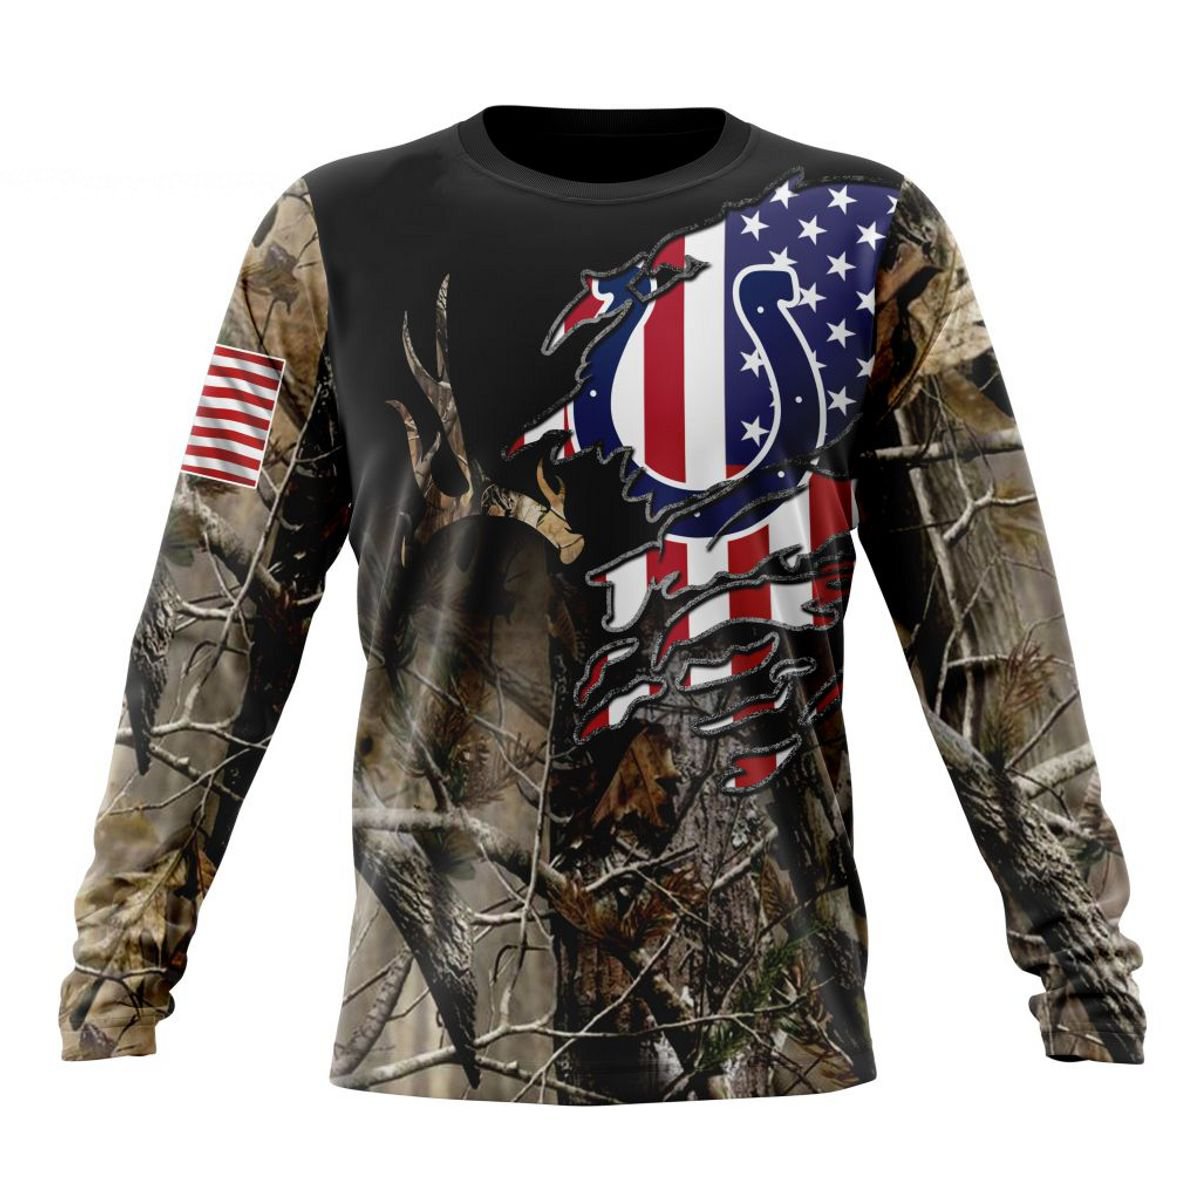 INDIANAPOLIS COLTS 3D HOODIE CAMO REALTREE HUNTING